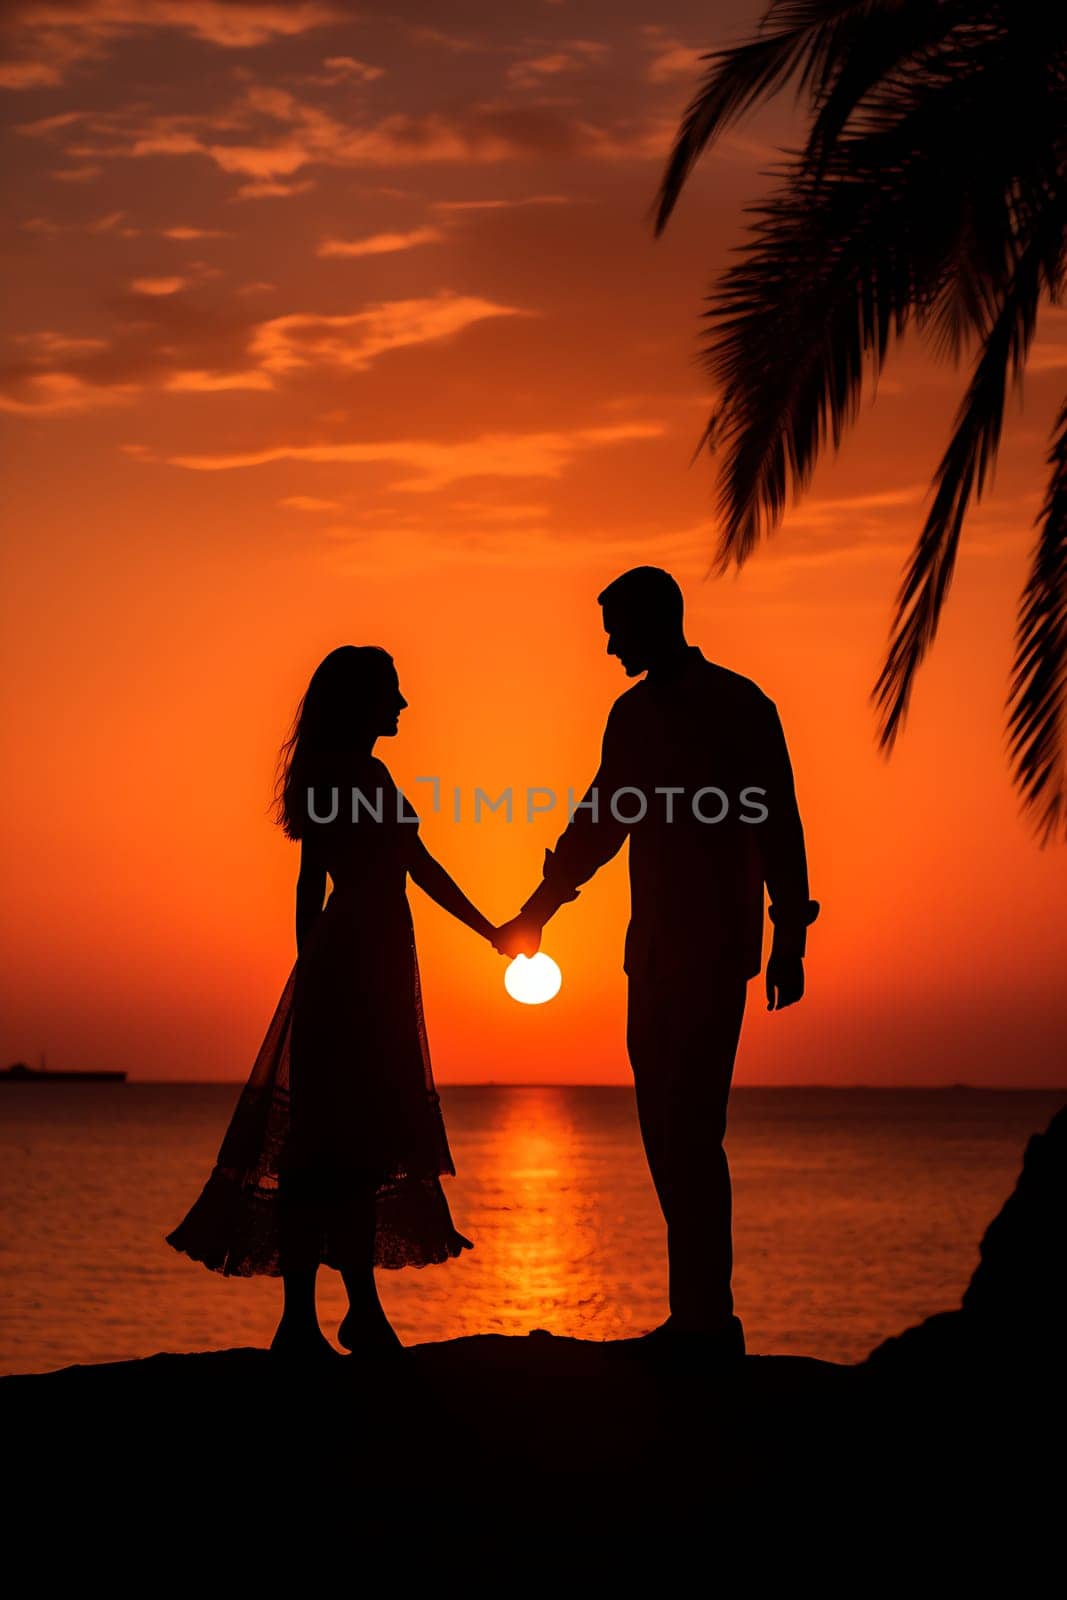 Silhouettes of a Couple Holding Hands Under the Night Sky by Raulmartin